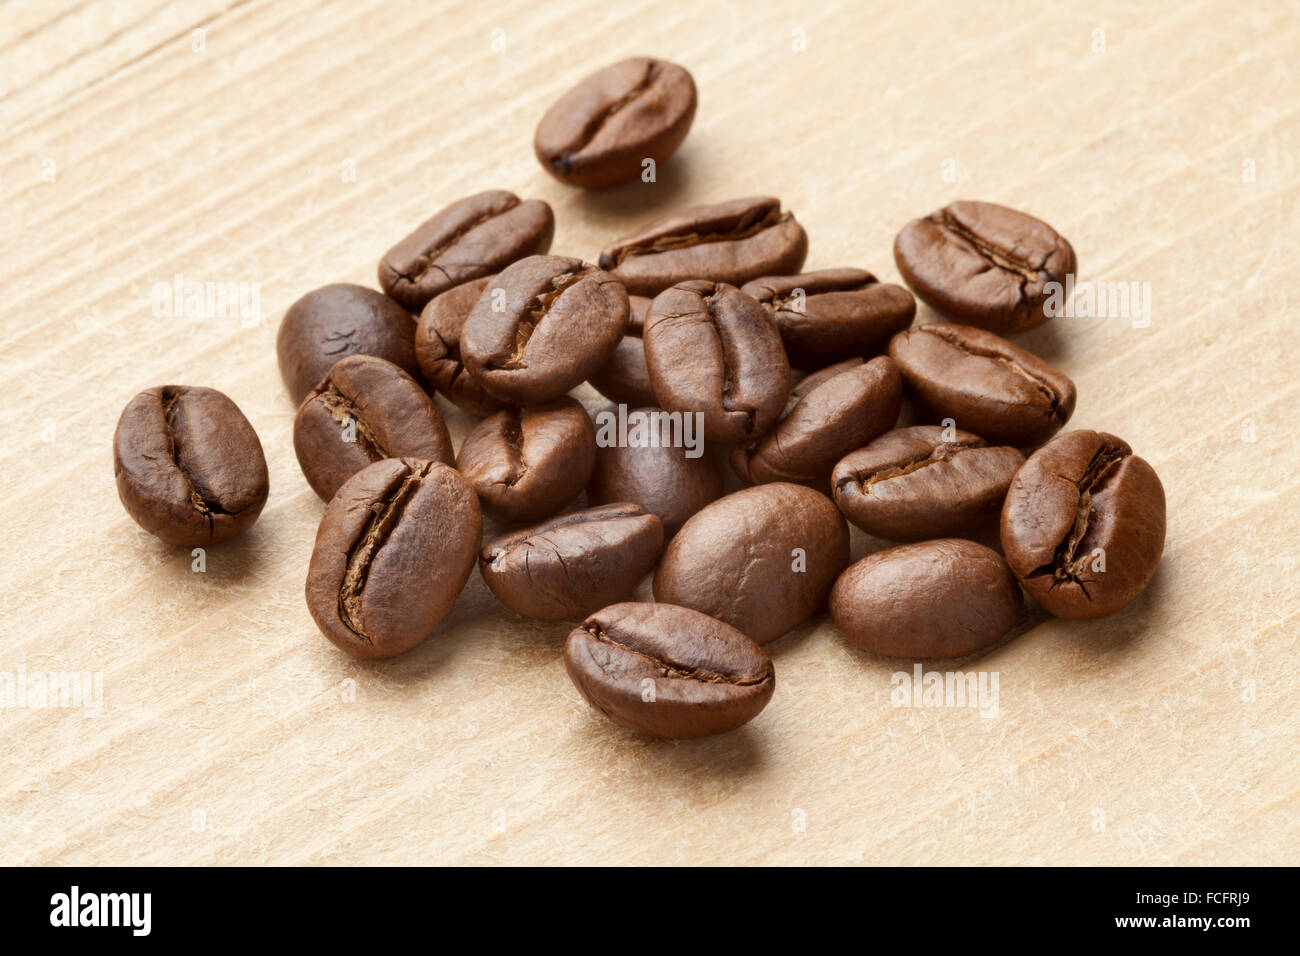 Heap of roasted  Malabar coffee beans from India Stock Photo